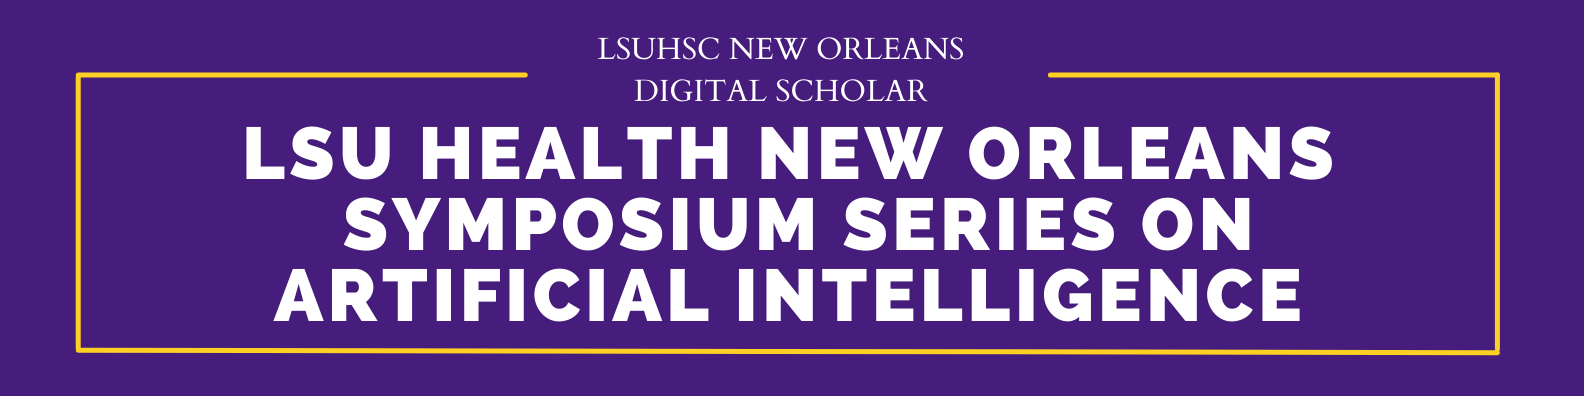 LSU Health New Orleans Symposium Series on Artificial Intelligence